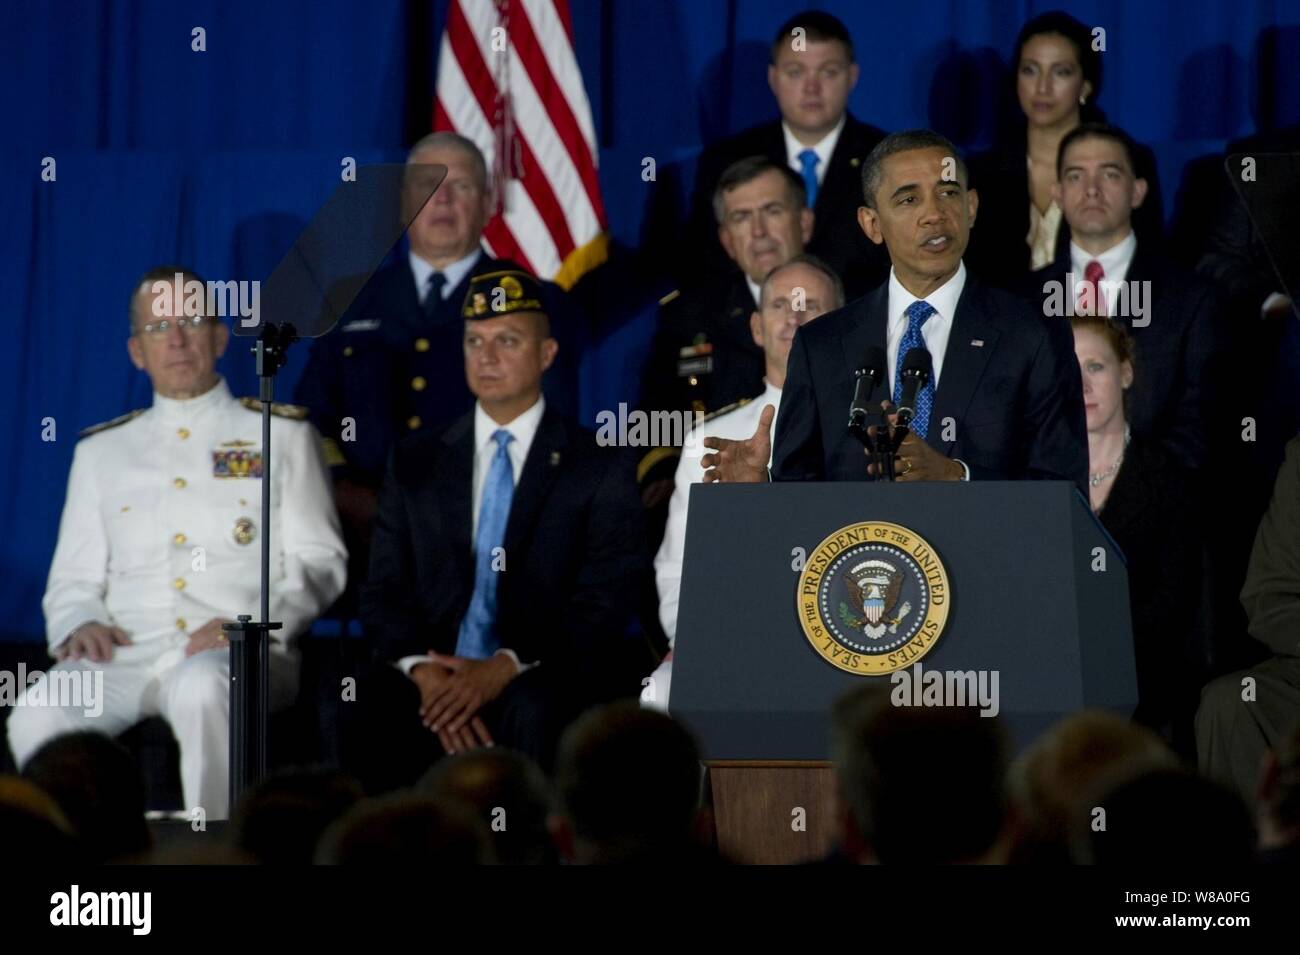 President Barack Obama addresses audience members at the Washington Navy Yard on August 5, 2011.  Obama delivered remarks on the Administration's initiative to help America's veterans find employment. Stock Photo